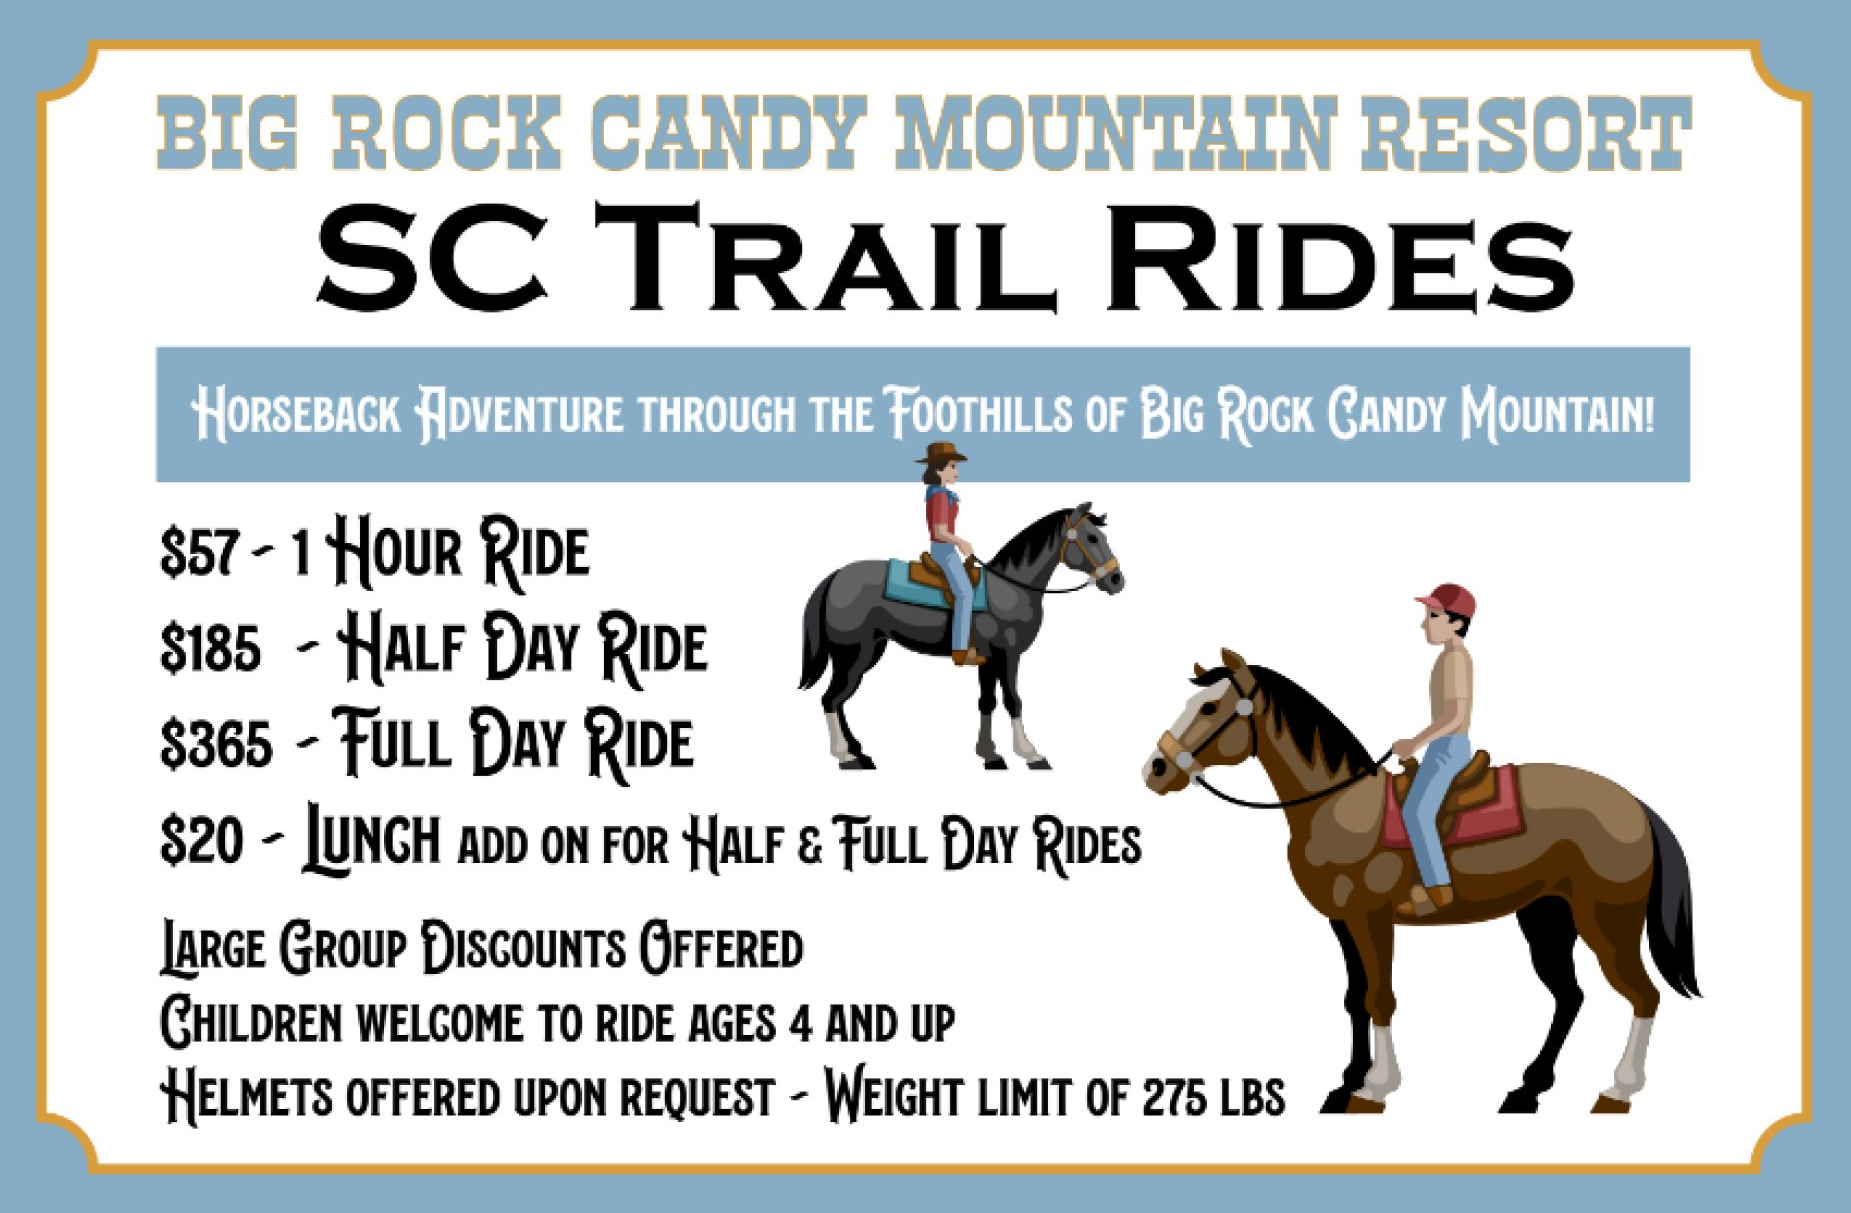 A sign for big rock candy mountain resort sc trail rides